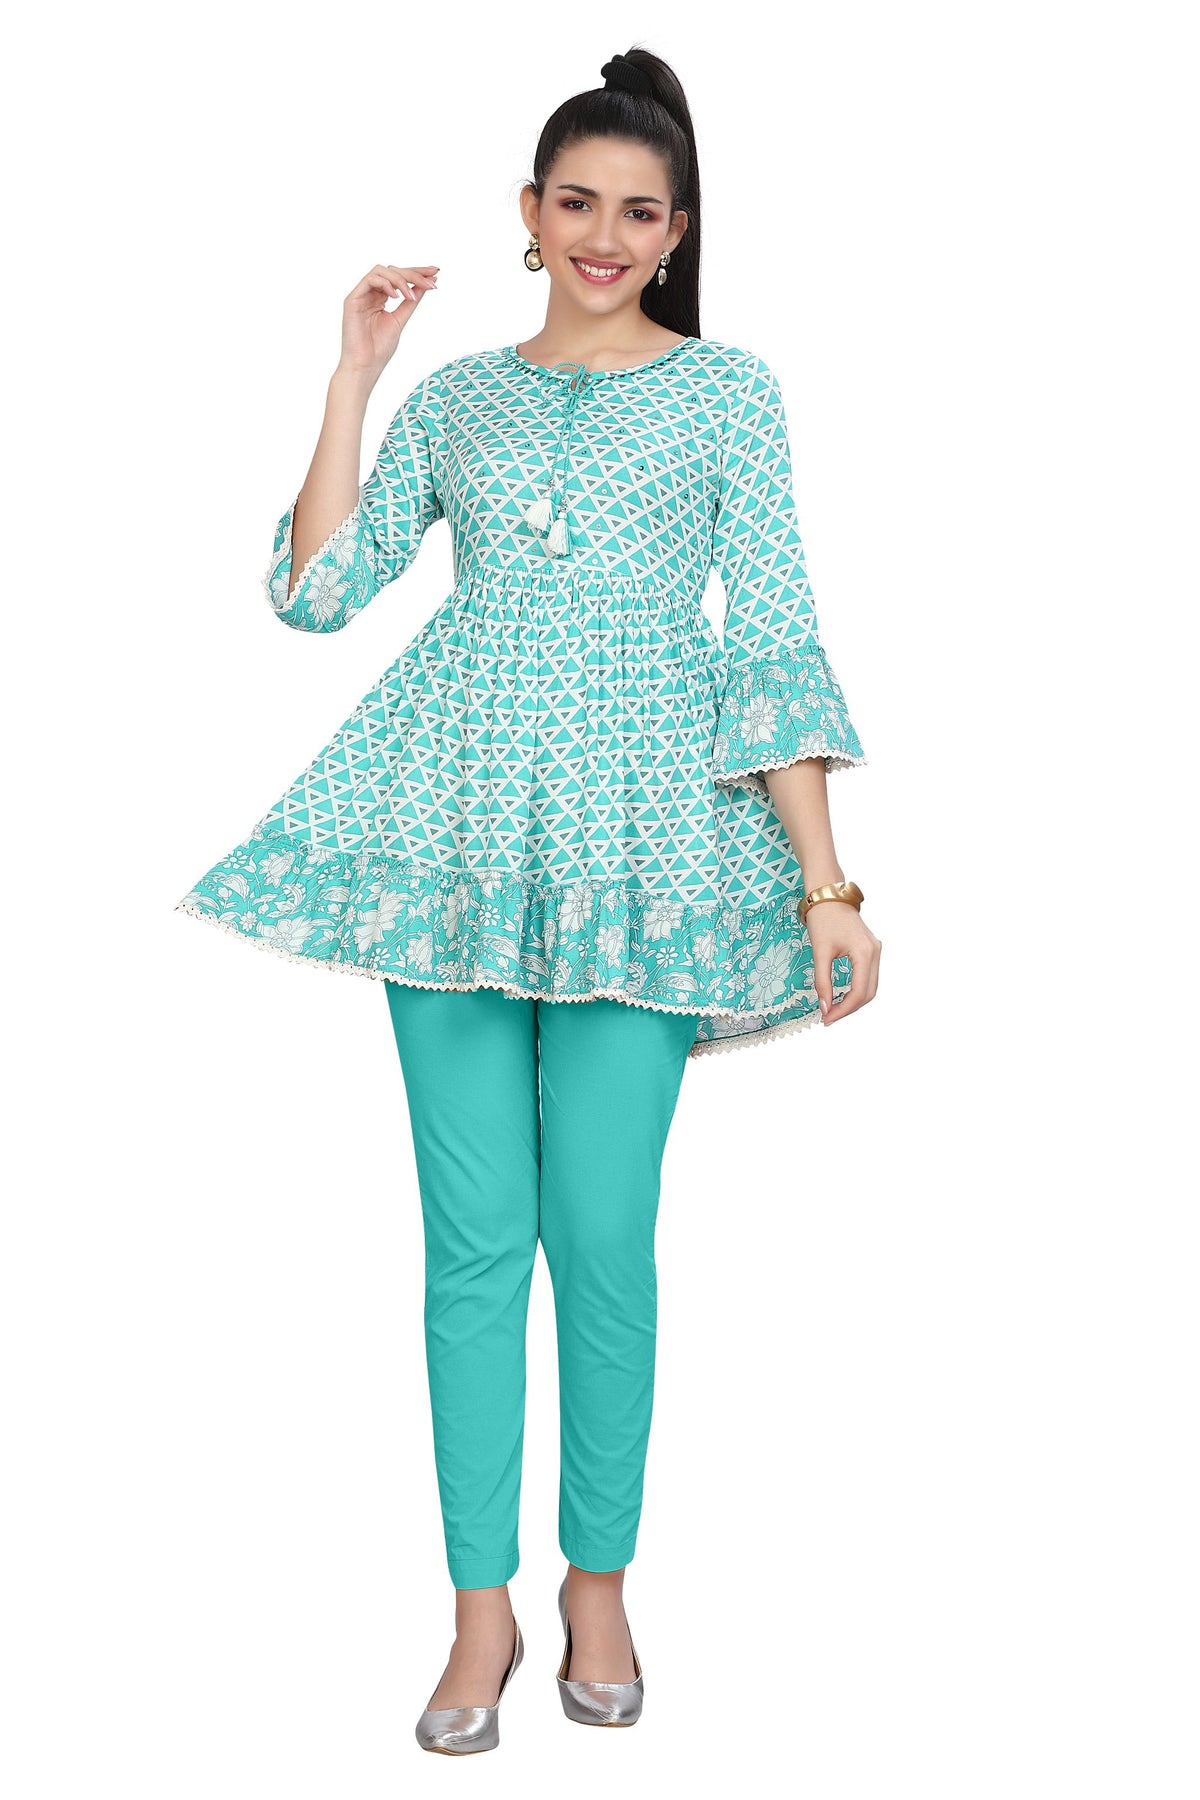 Cotton Casual Wear Round Neck Frock Style Kurti, Size: XL-XXL, Machine wash  at Rs 310 in Jaipur